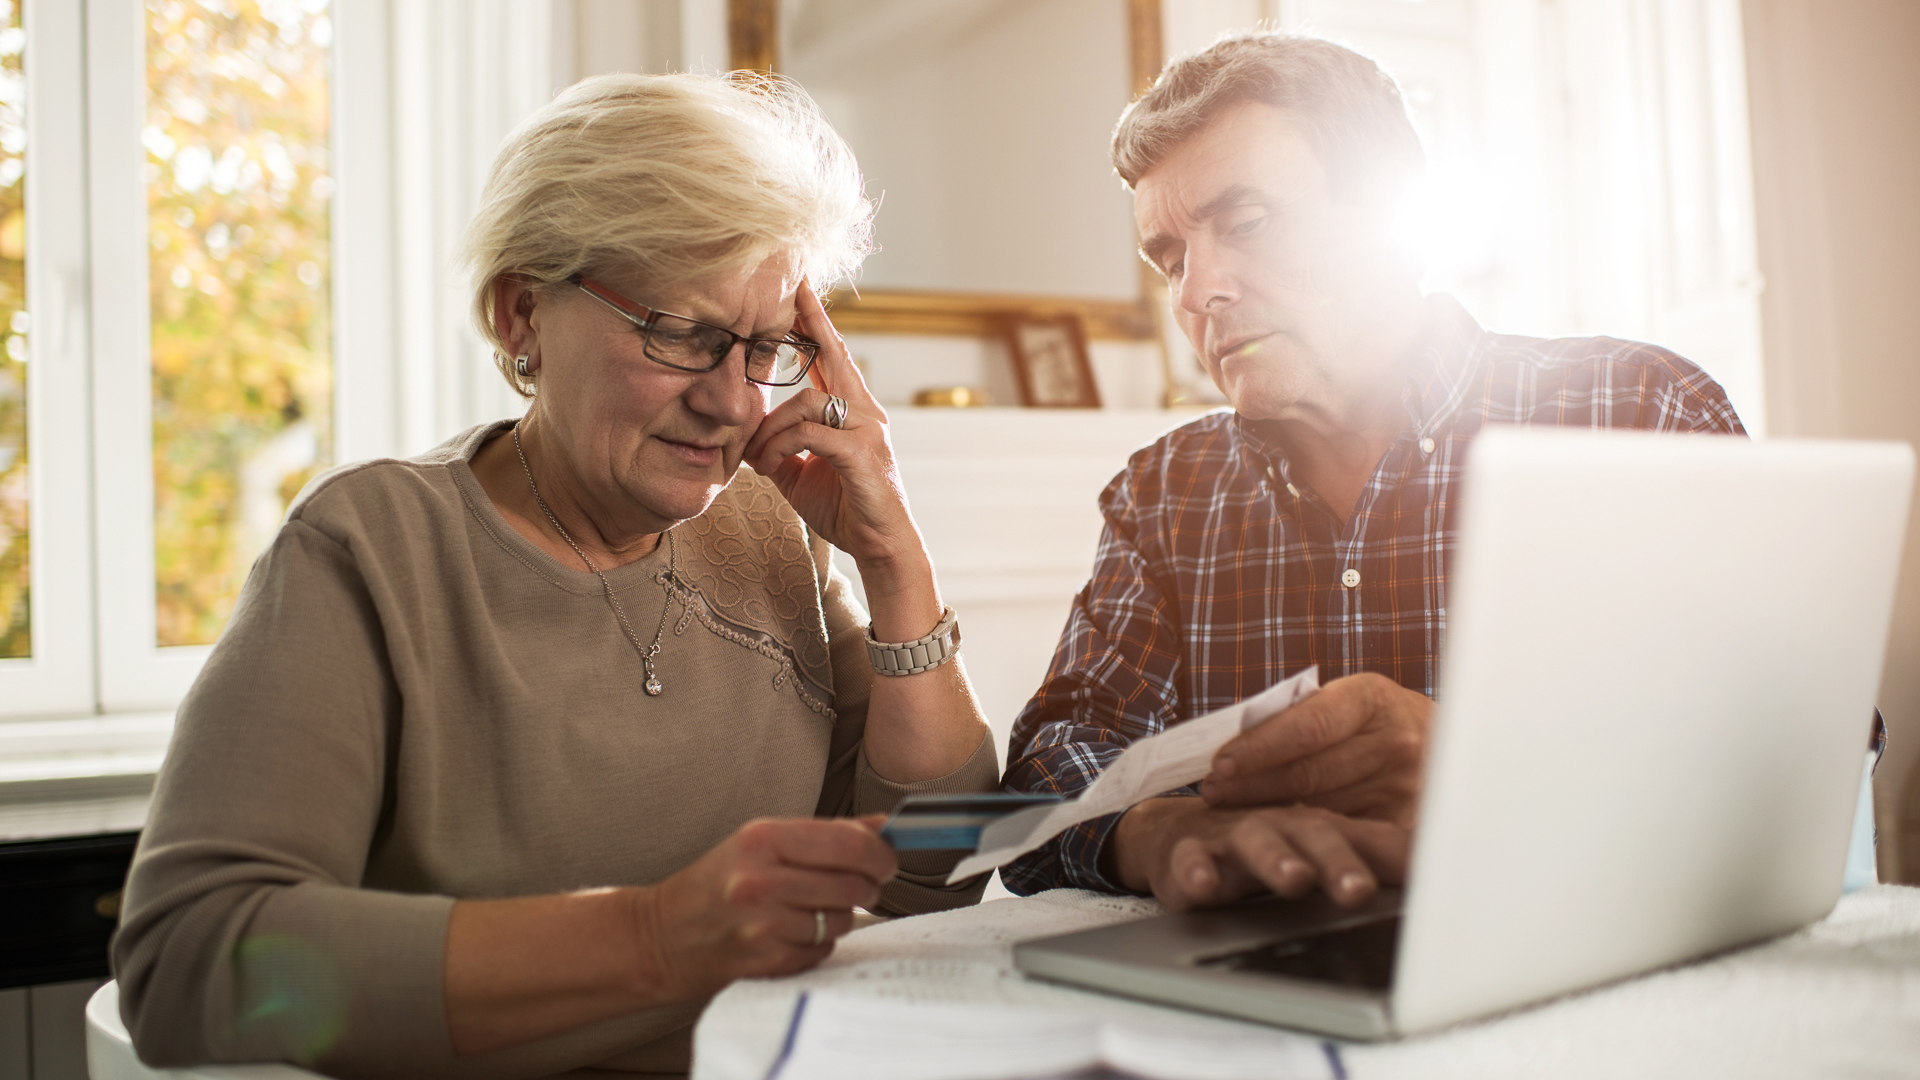 Approaching Retirement With Debt? 8 Steps To Pay Off Debt and Save